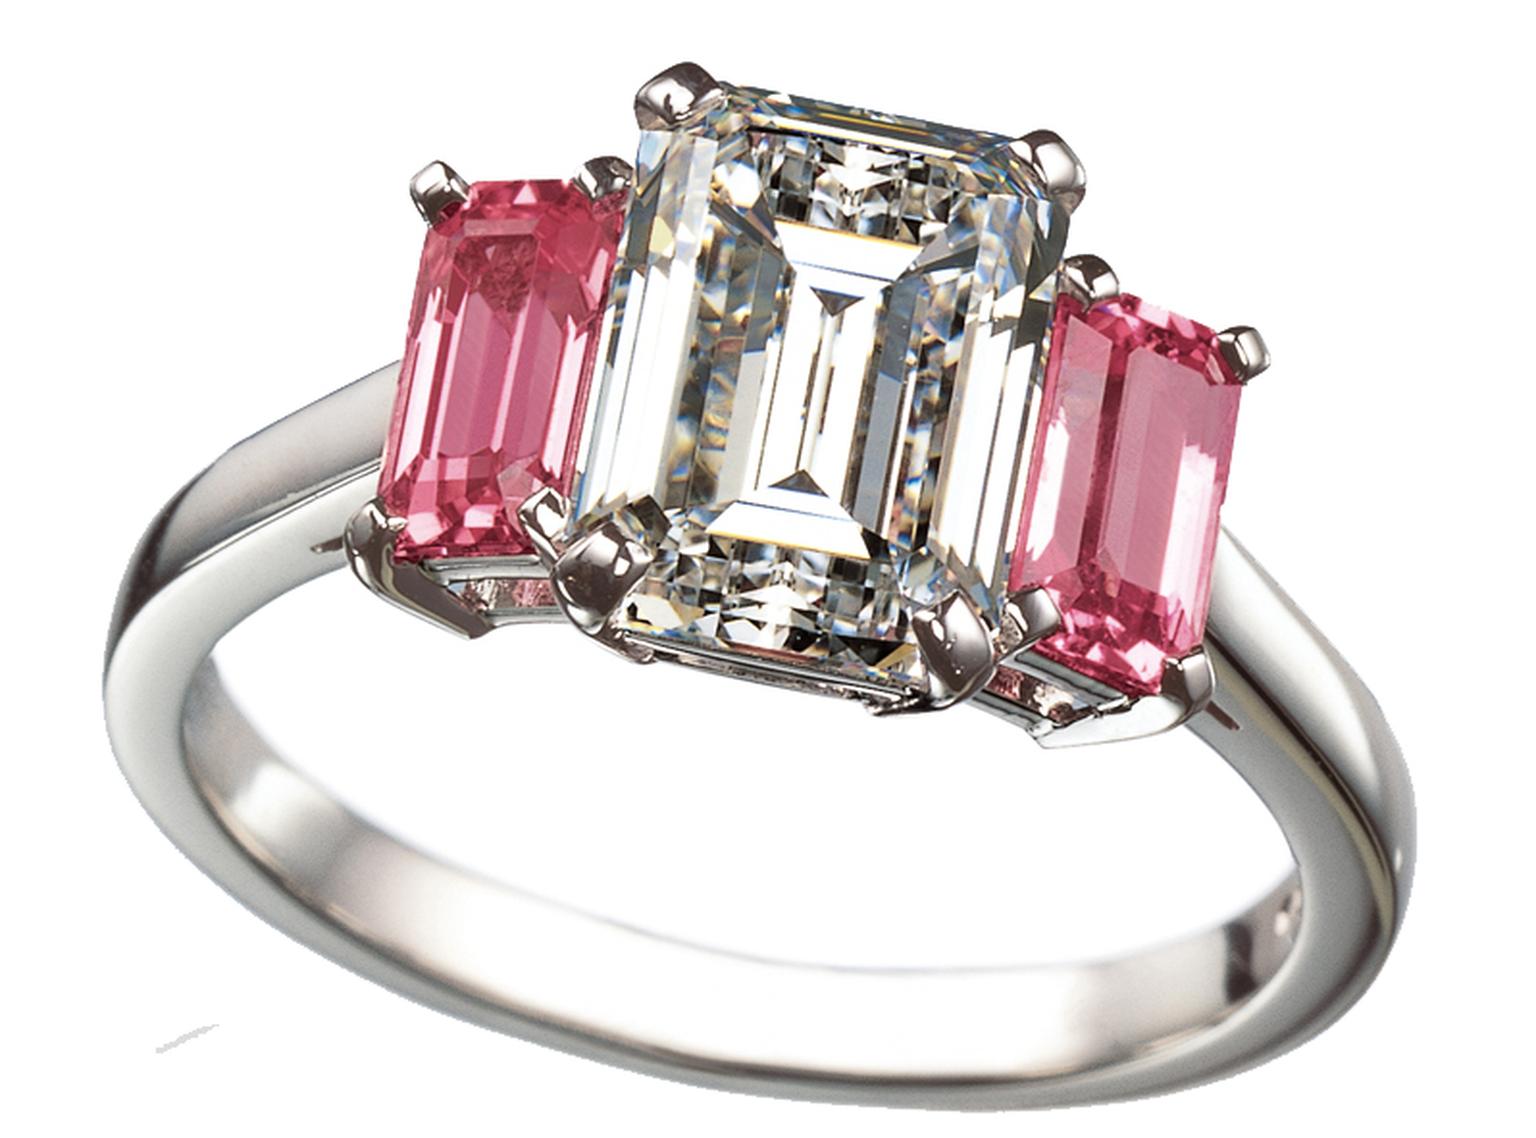 Ritz Fine Jewellery emerald-cut three stone engagement ring featuring one white diamond and two pink diamonds.